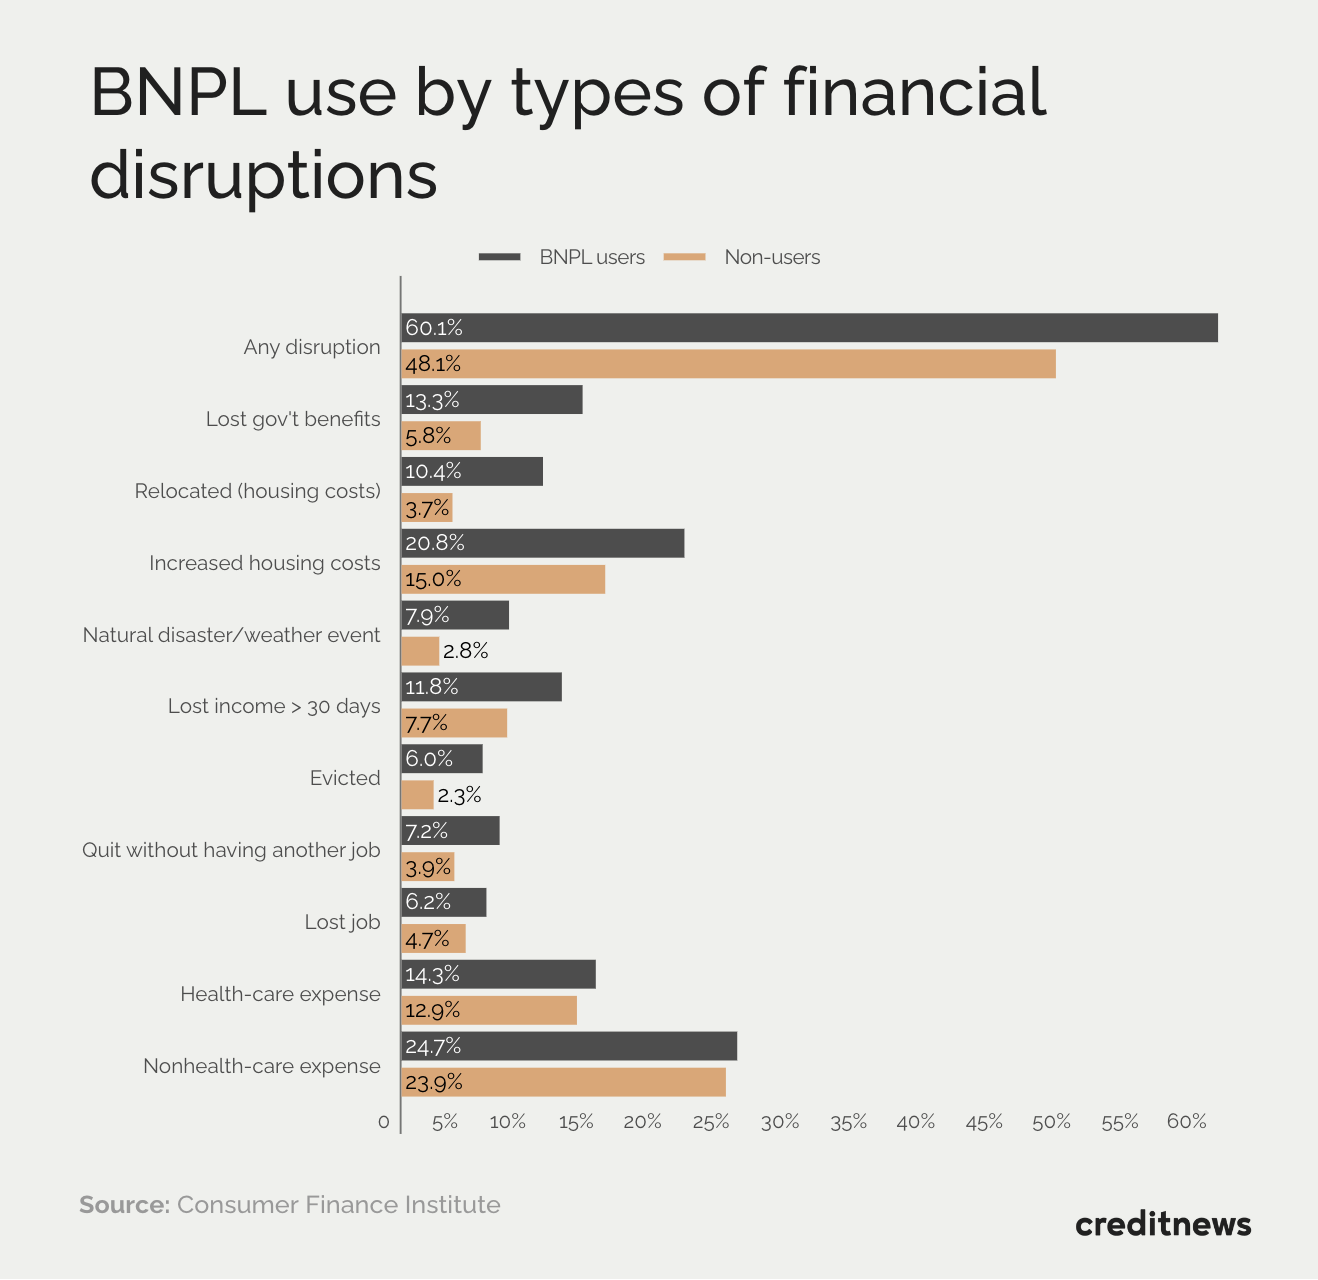 Chart showing BNP use by types of financial disruption